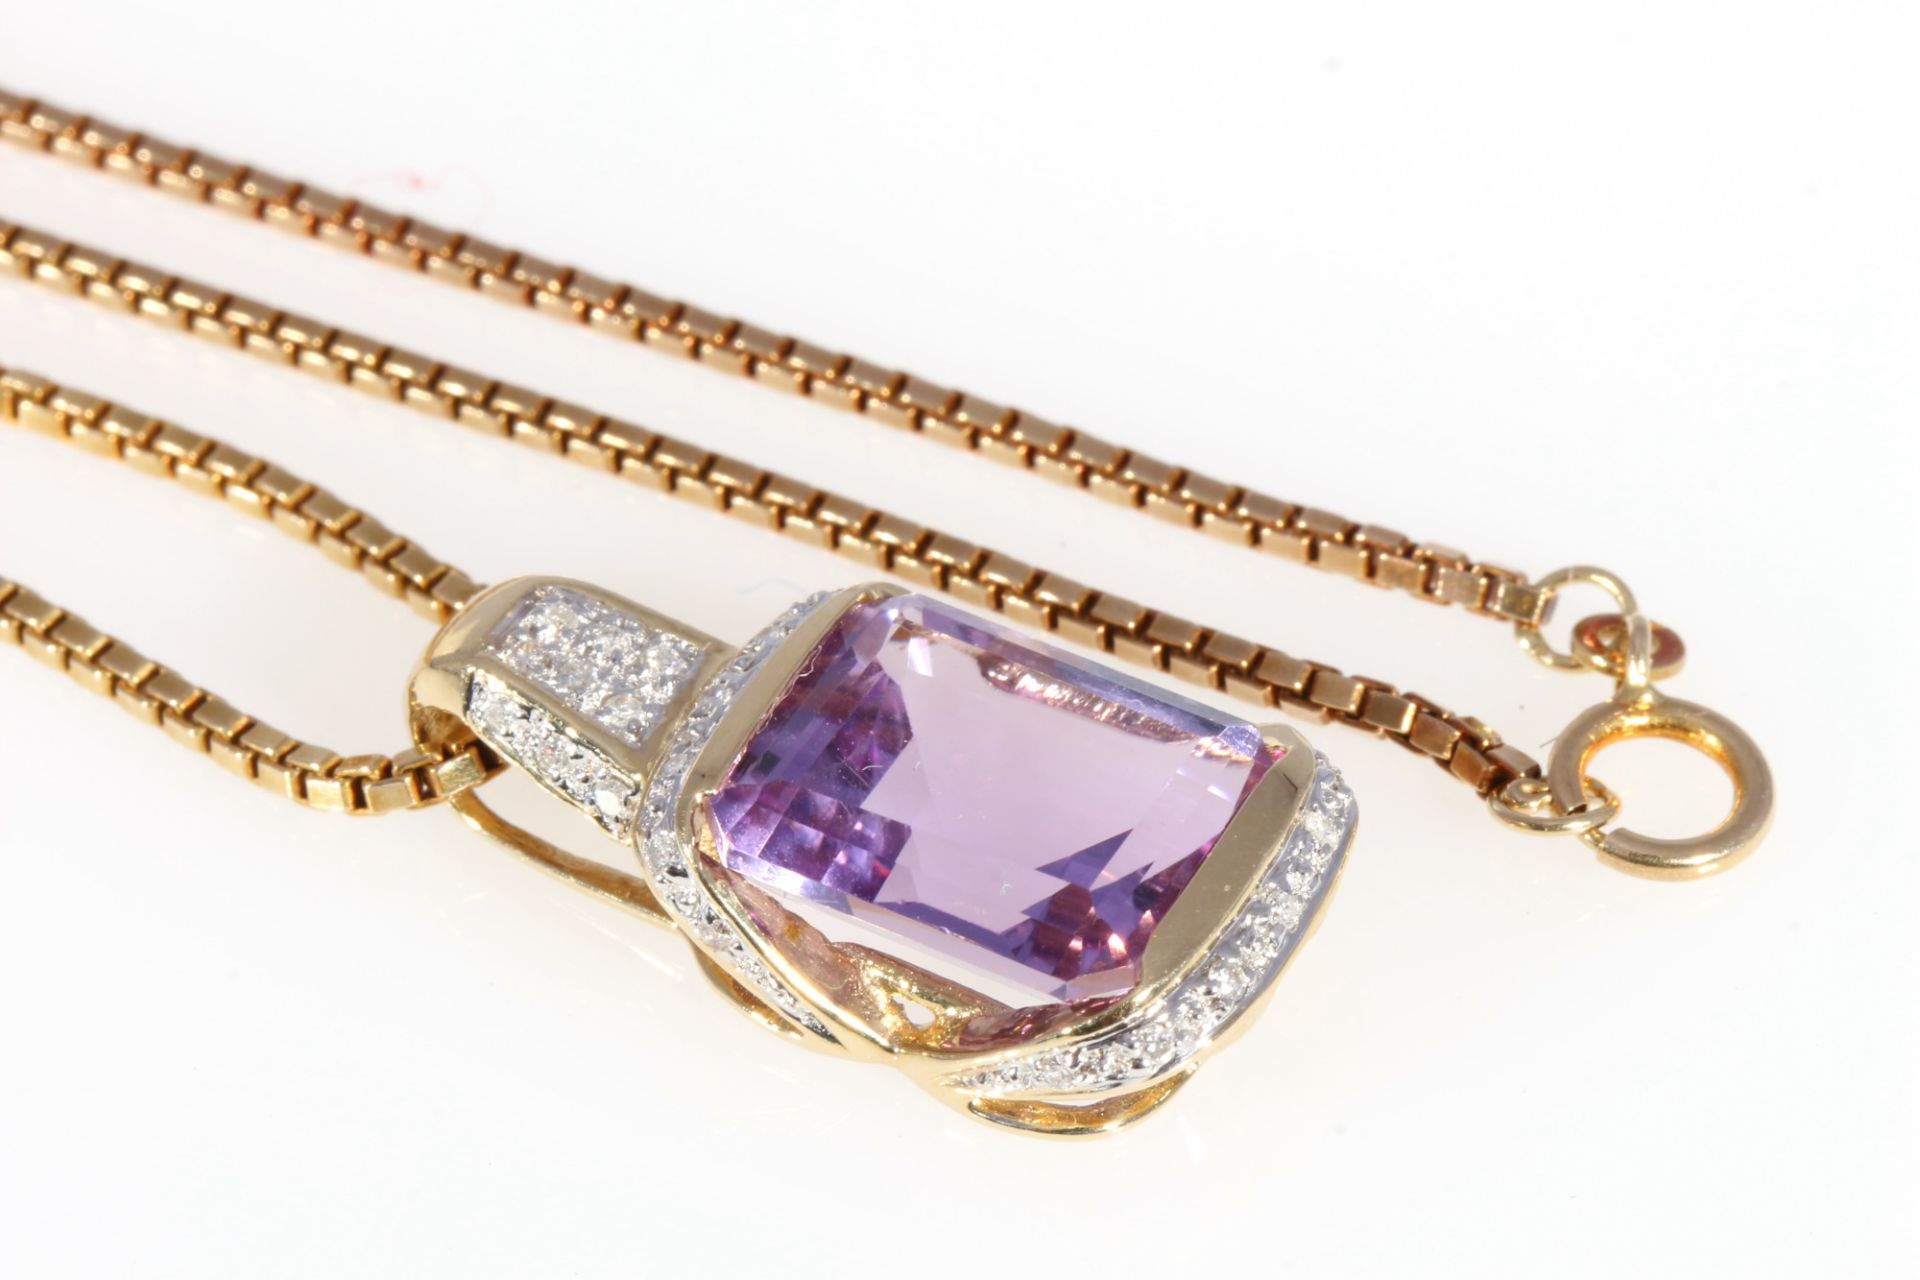 585 gold amethyst pendant with diamonds and 585 gold chain, 14K Gold Anhänger Amethyst mit Brillante